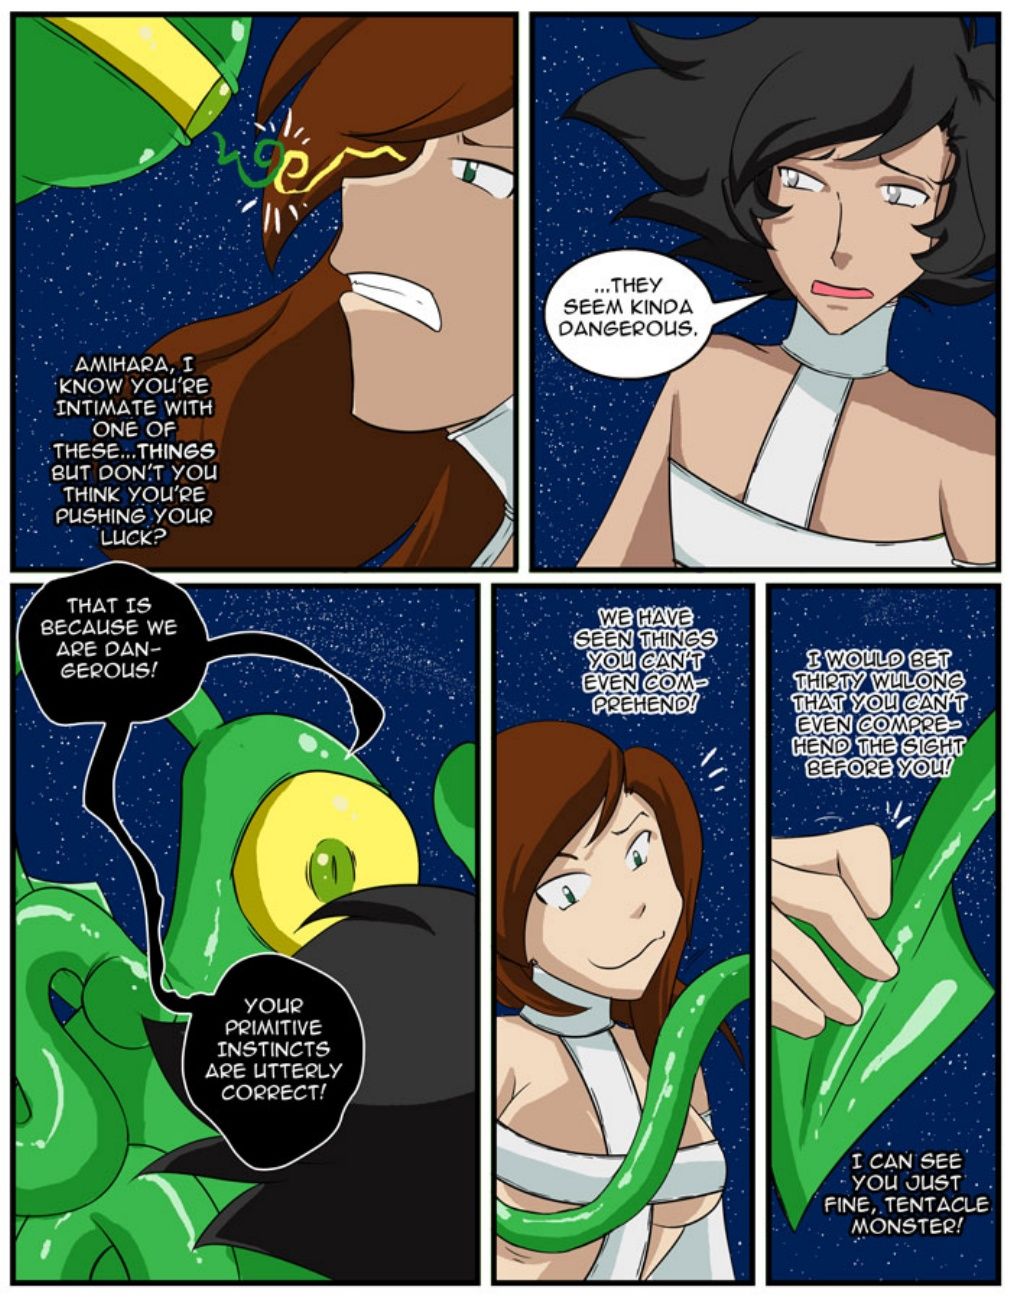 A Date With A Tentacle Monster 6 Part 2 page 1